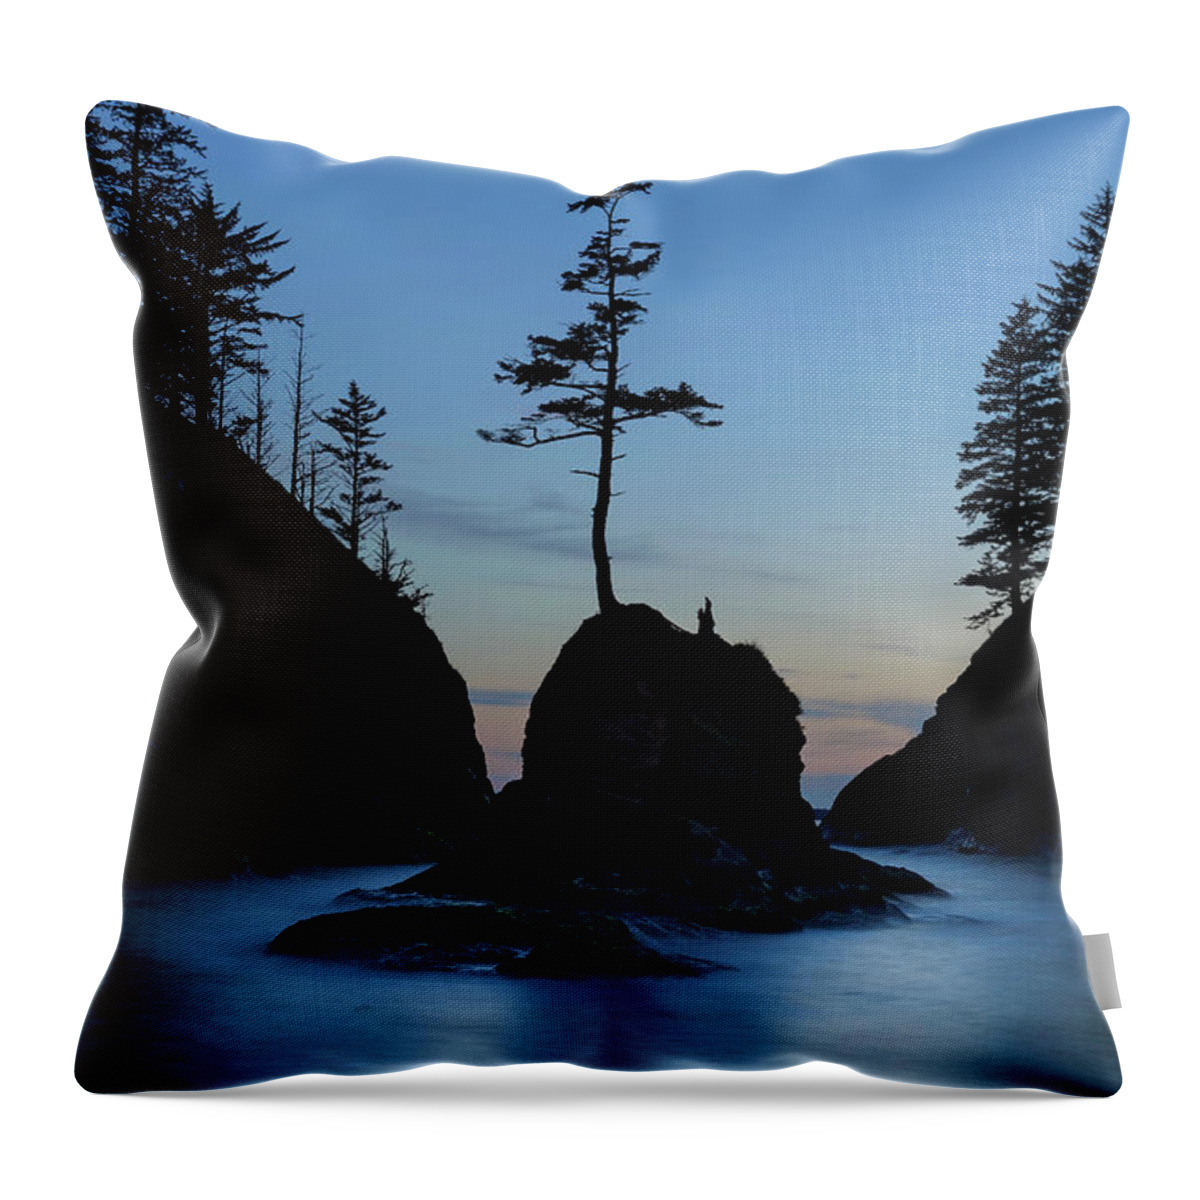 Deadmans Throw Pillow featuring the photograph Deadman's Cove at Cape Disappointment at Twilight by David Gn